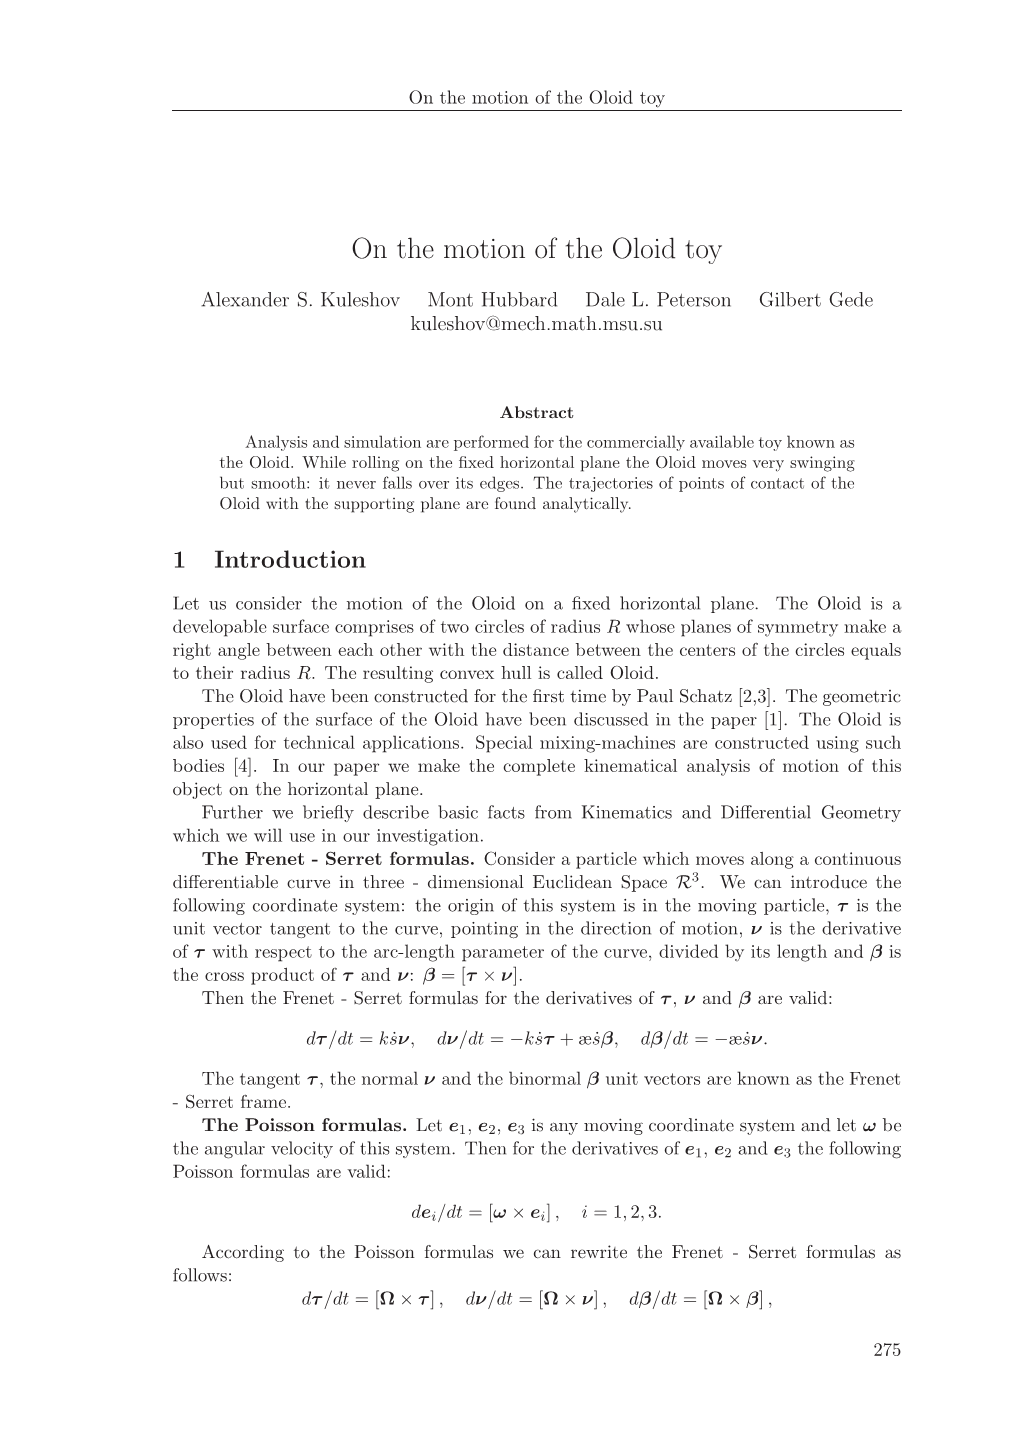 On the Motion of the Oloid Toy